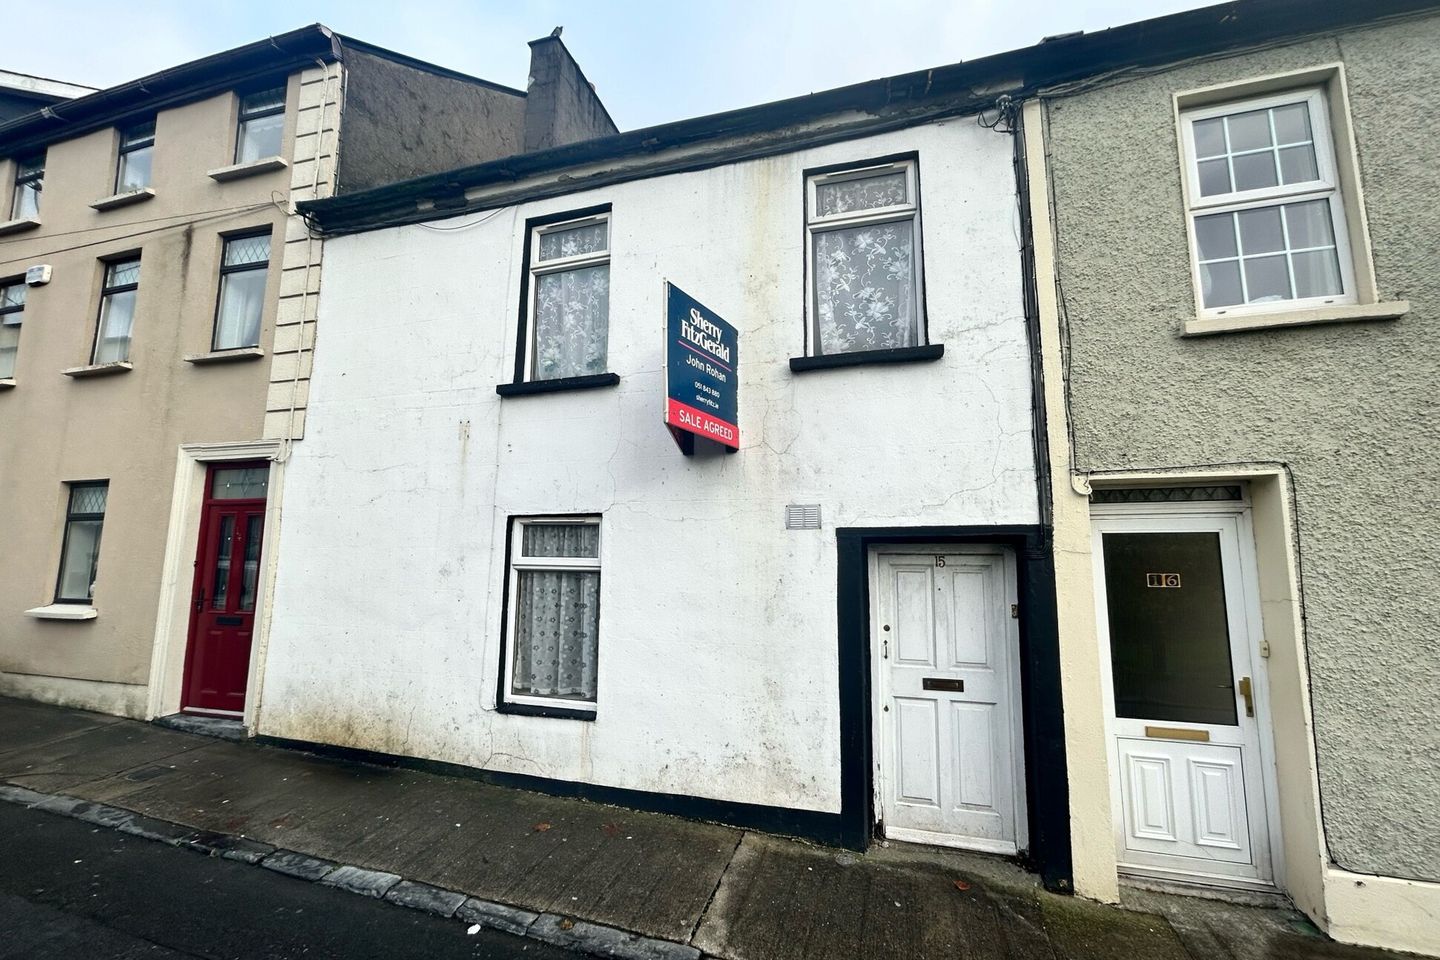 15 Parliament Street, Waterford, Waterford City, Co. Waterford, X91VK5D